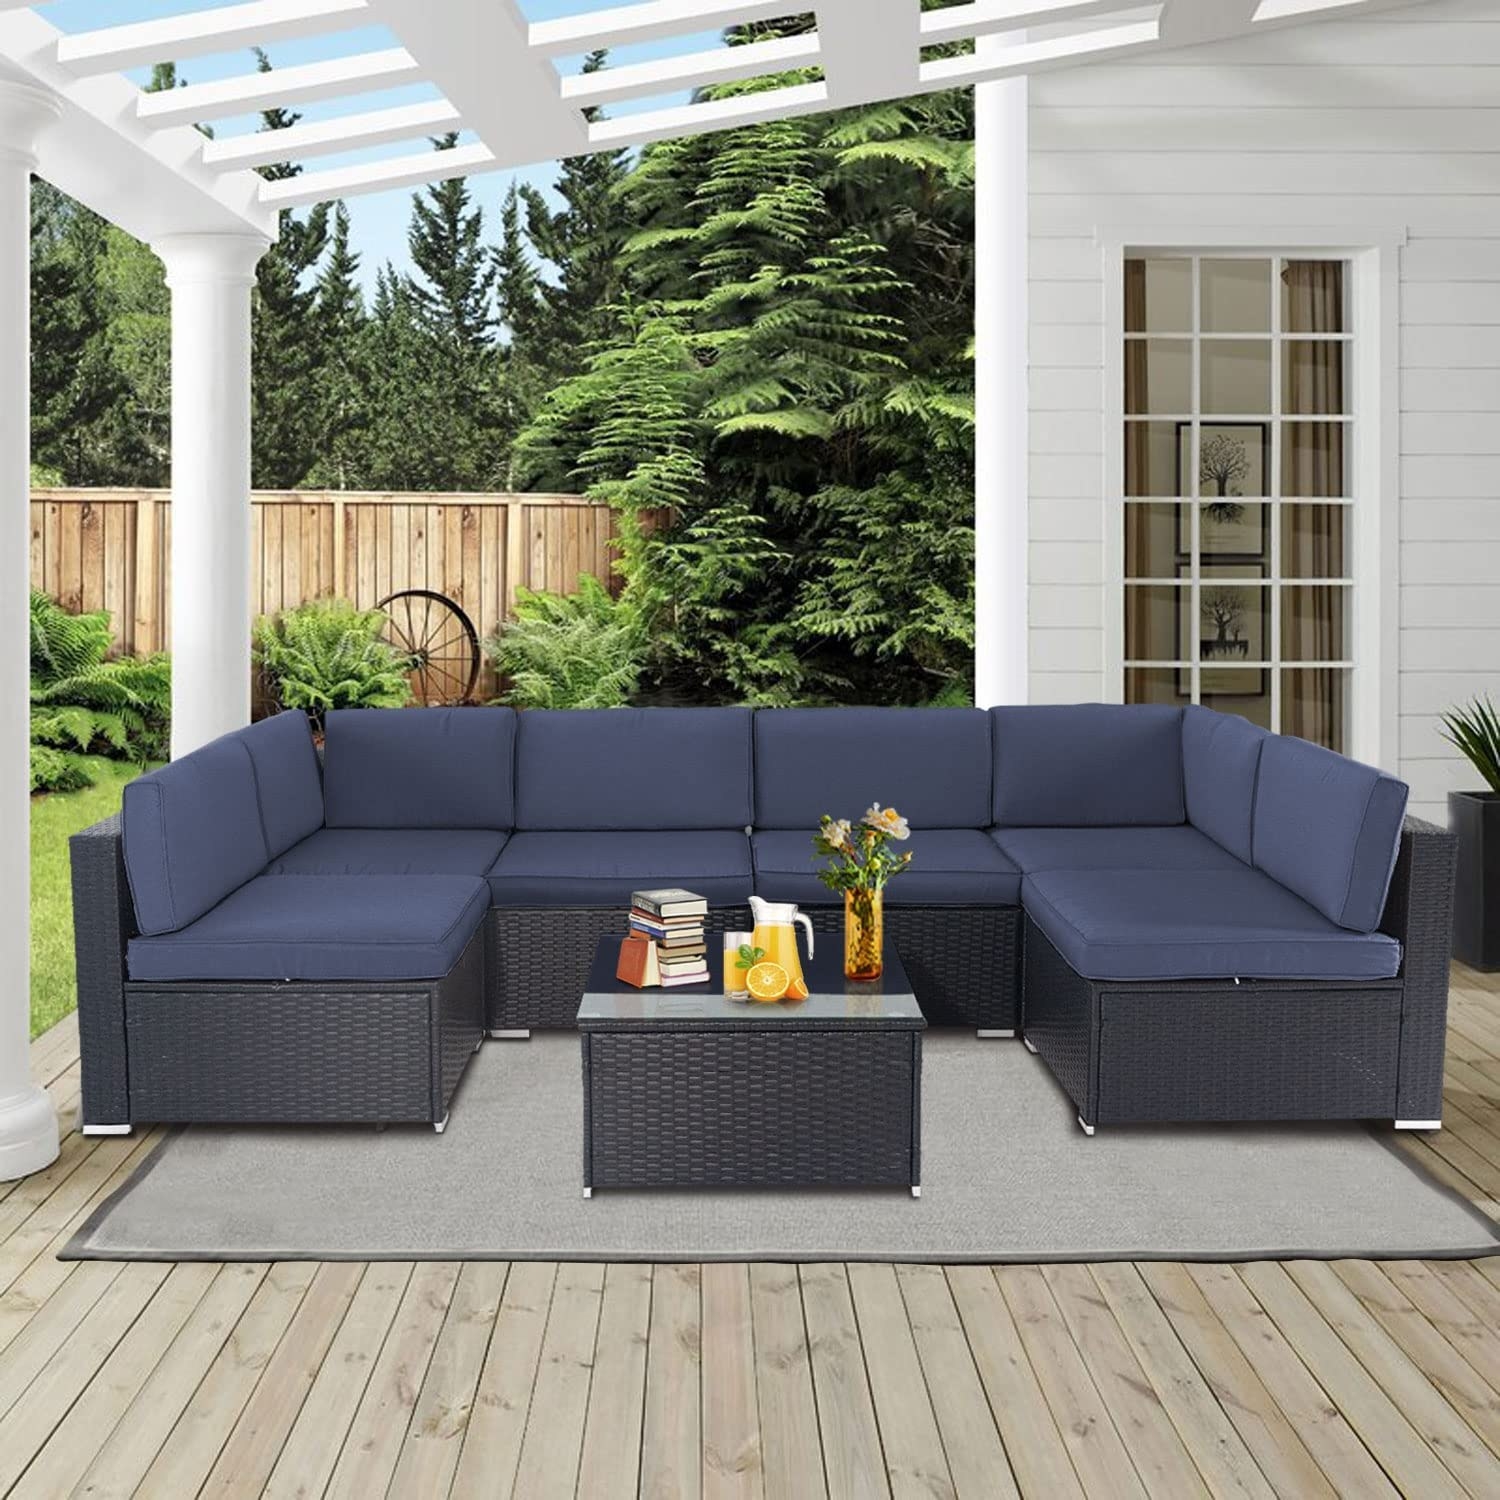 An outdoor sectional and matching coffee table are shown on a deck